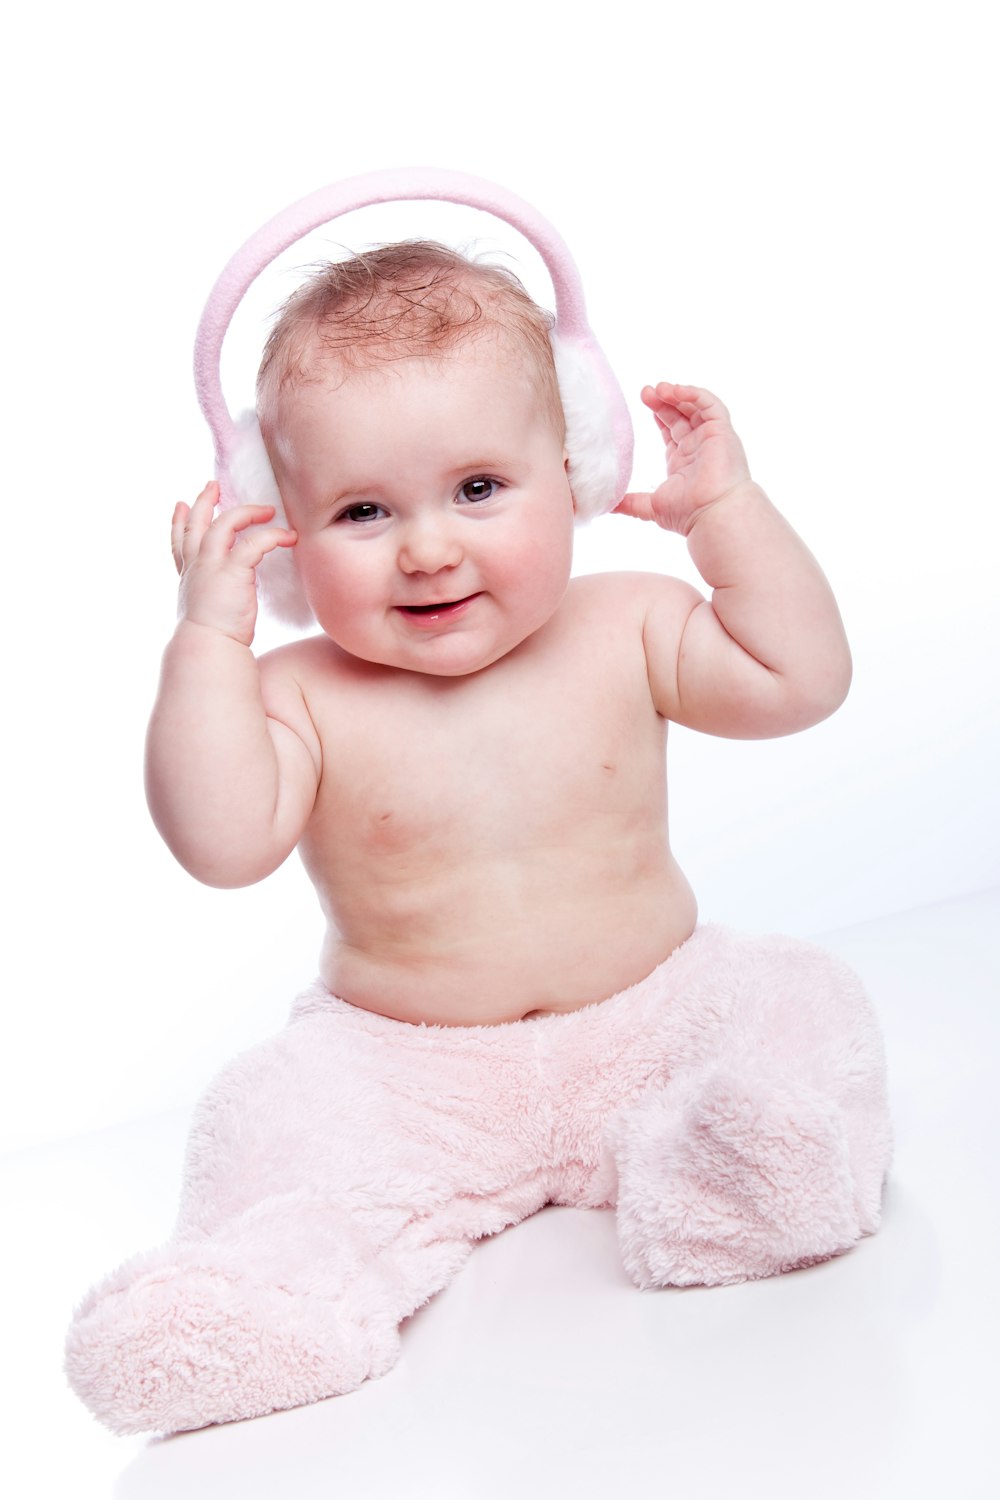 a baby wearing a pink outfit and a pair of headphones